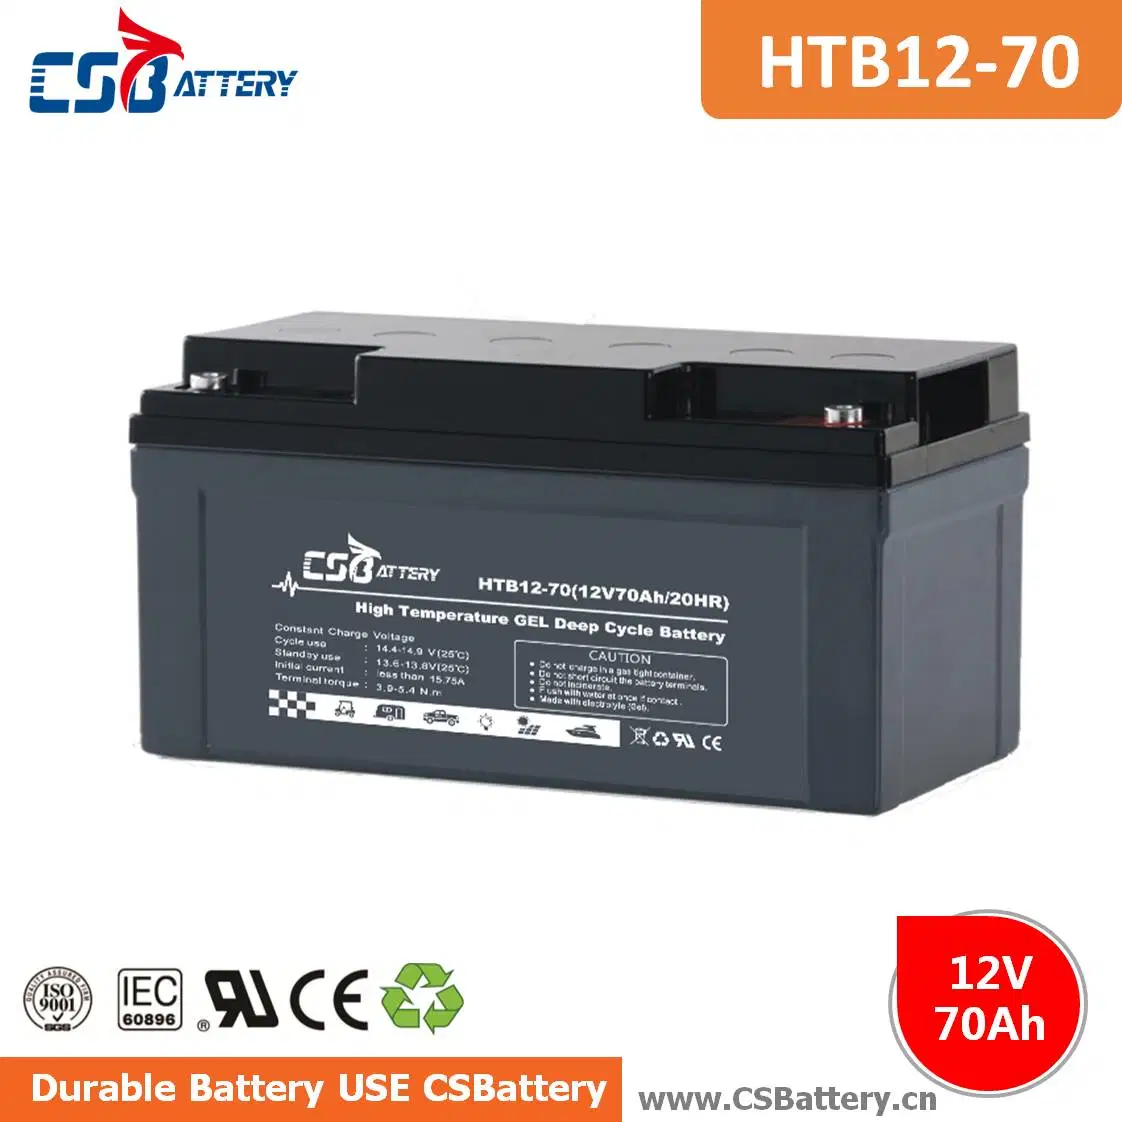 Csbattery 12V100ah Maintenance Free Gel Battery for Powered-Heater/Alarm/Agricultural-Machinery/Solar Generator/Amy